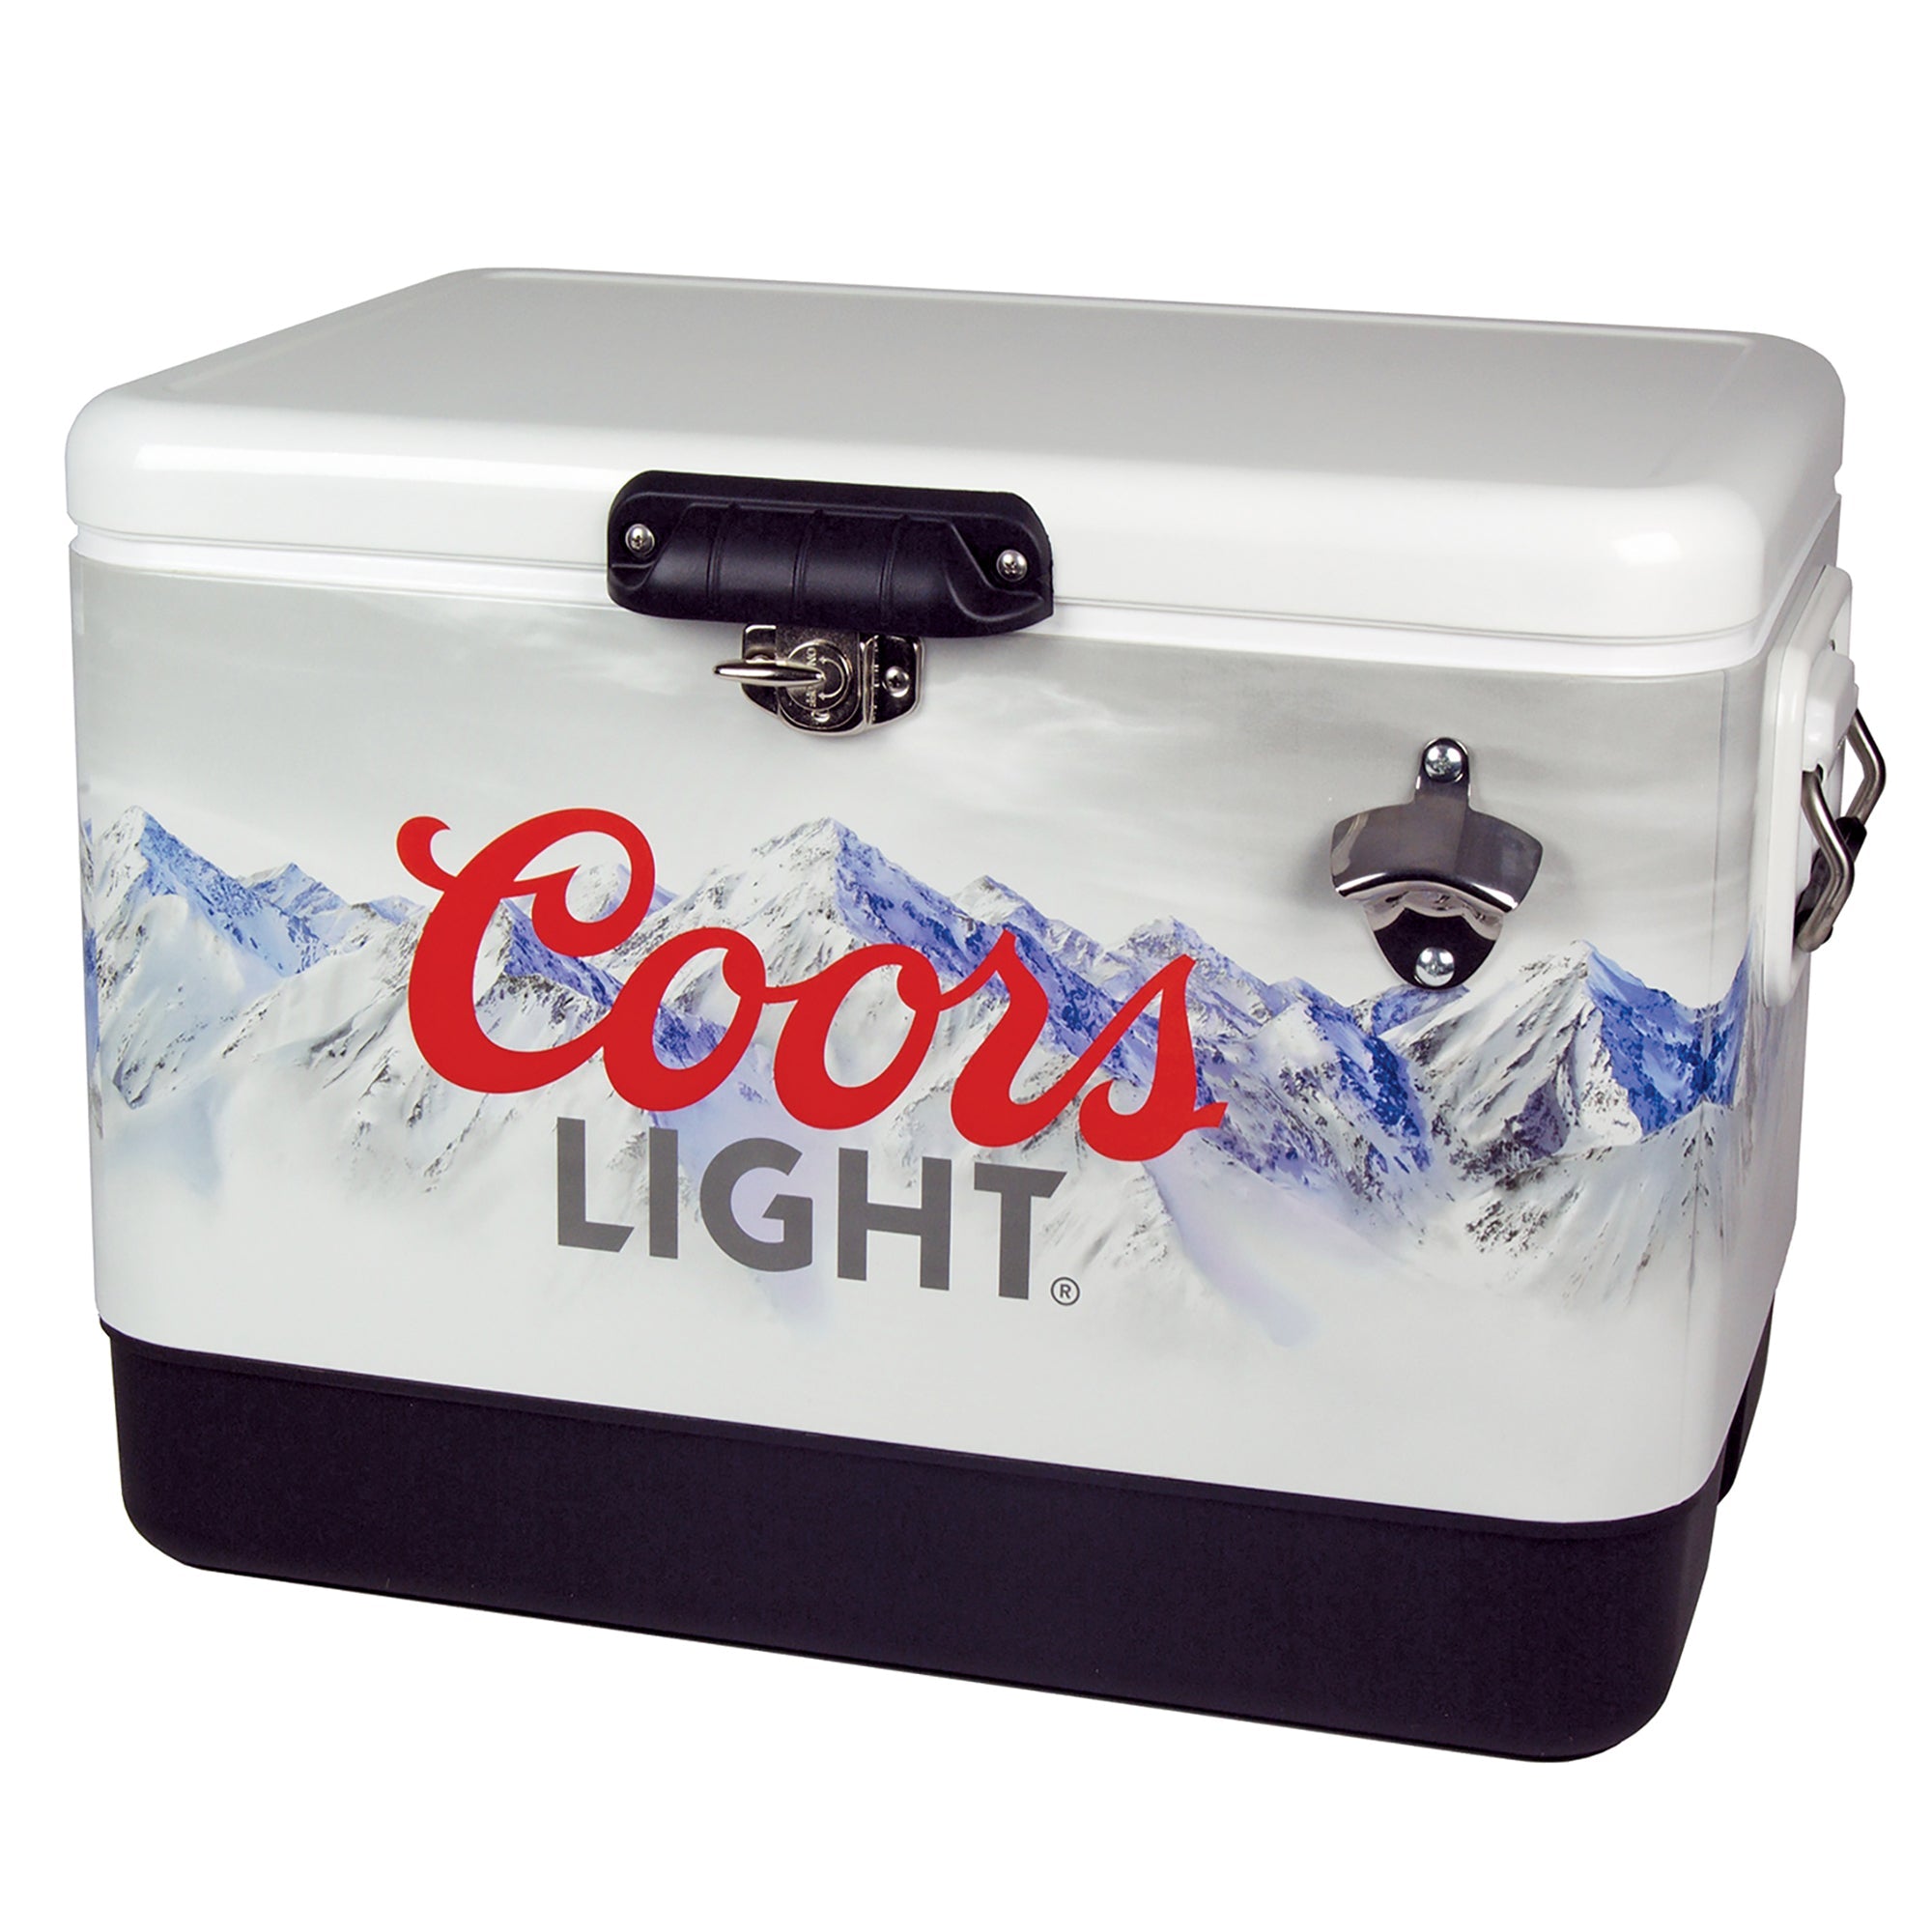 Product shot of Coors Light 51 liter ice chest with bottle opener, closed, on a white background